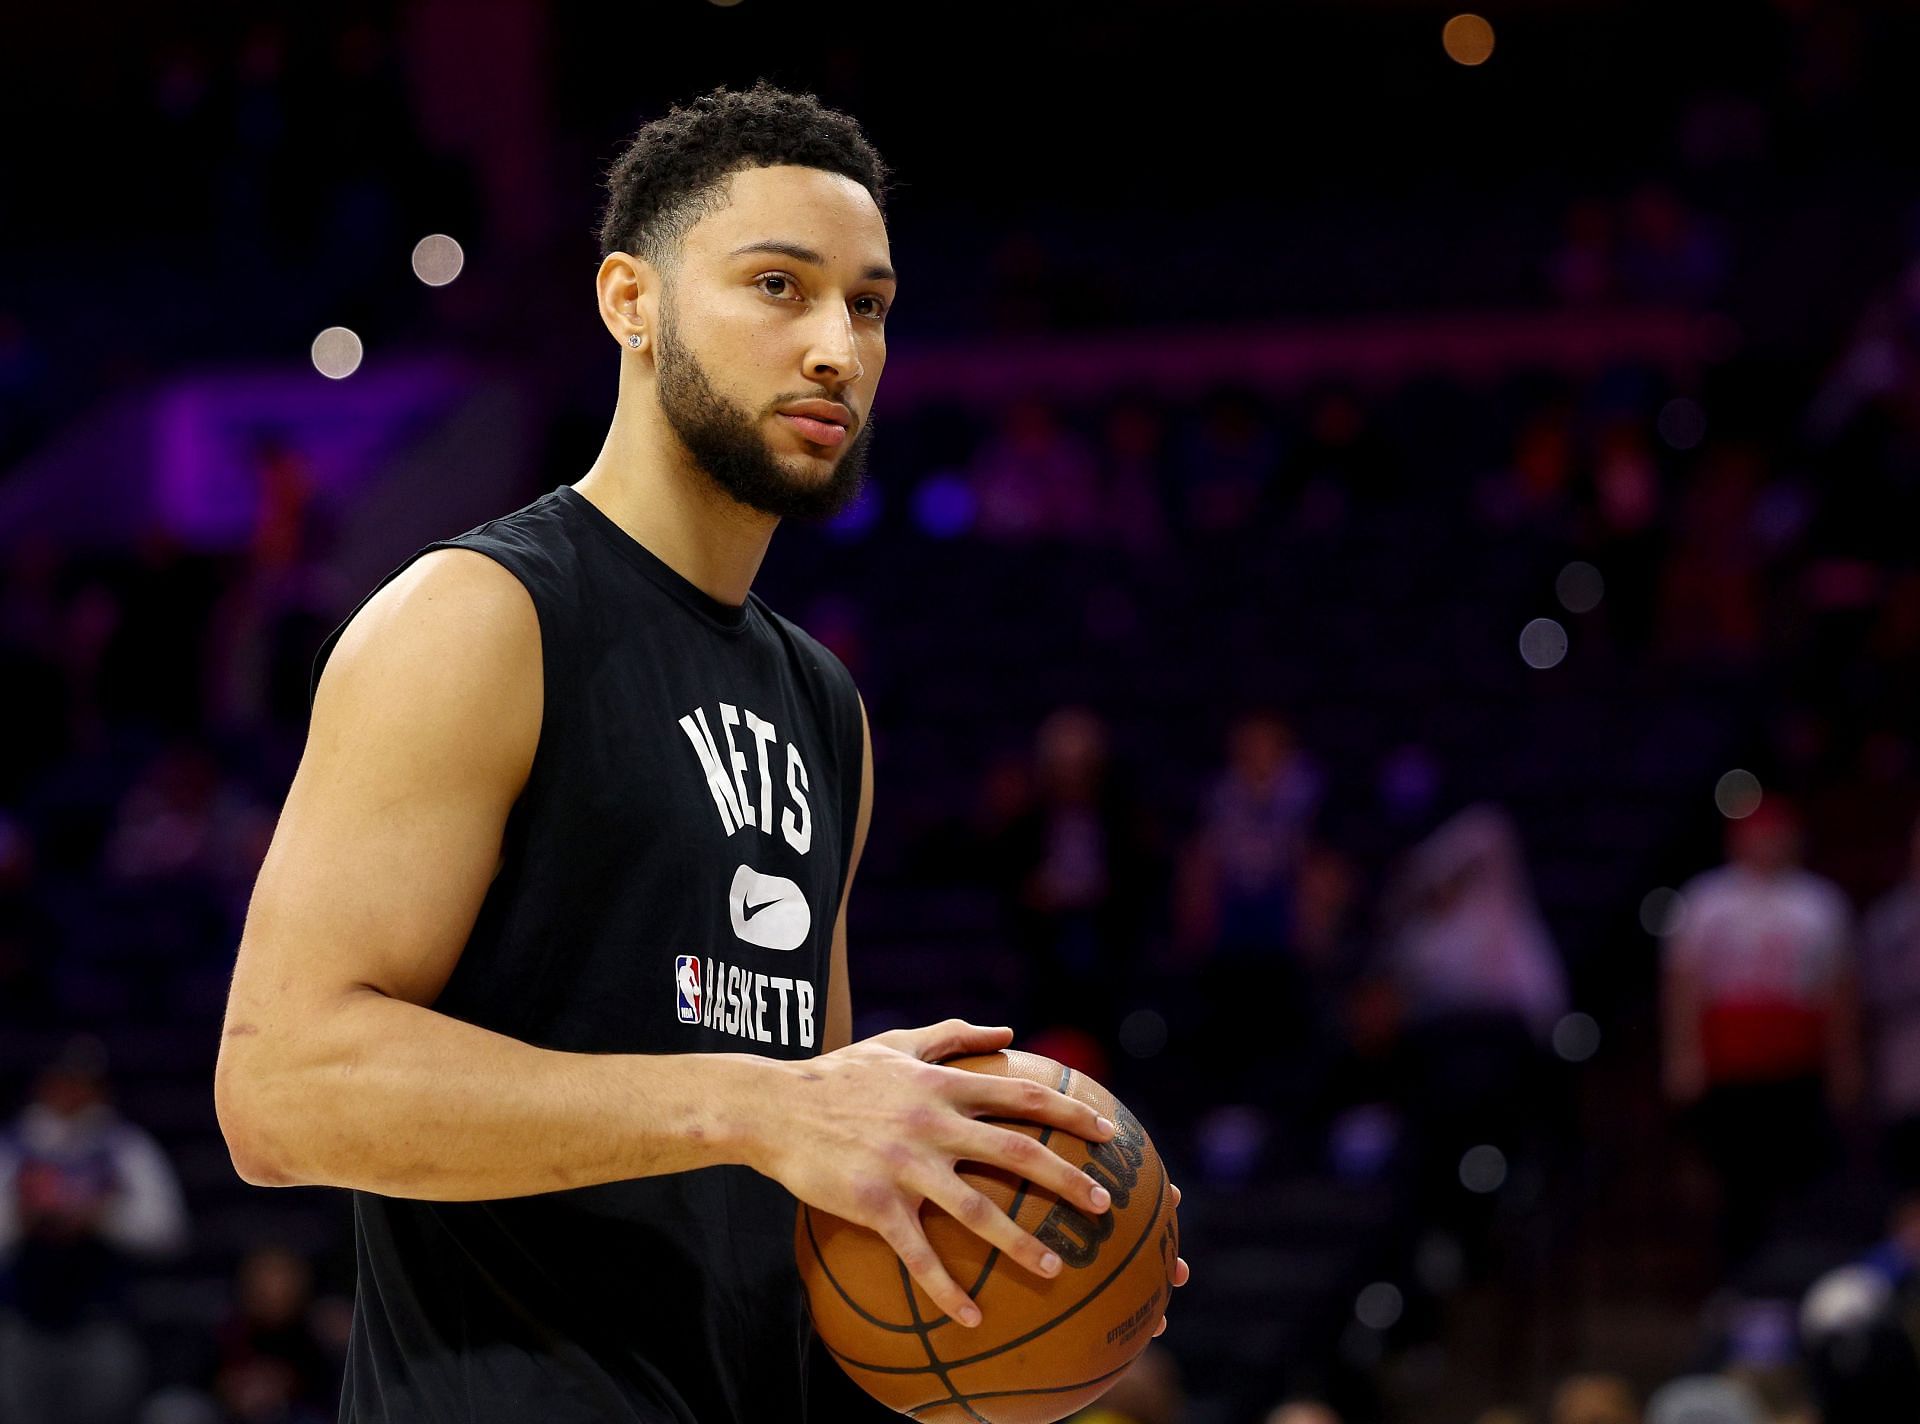 NBA 2021: Shaq slams Ben Simmons, would have knocked him out, Philadelphia  76ers news and reaction